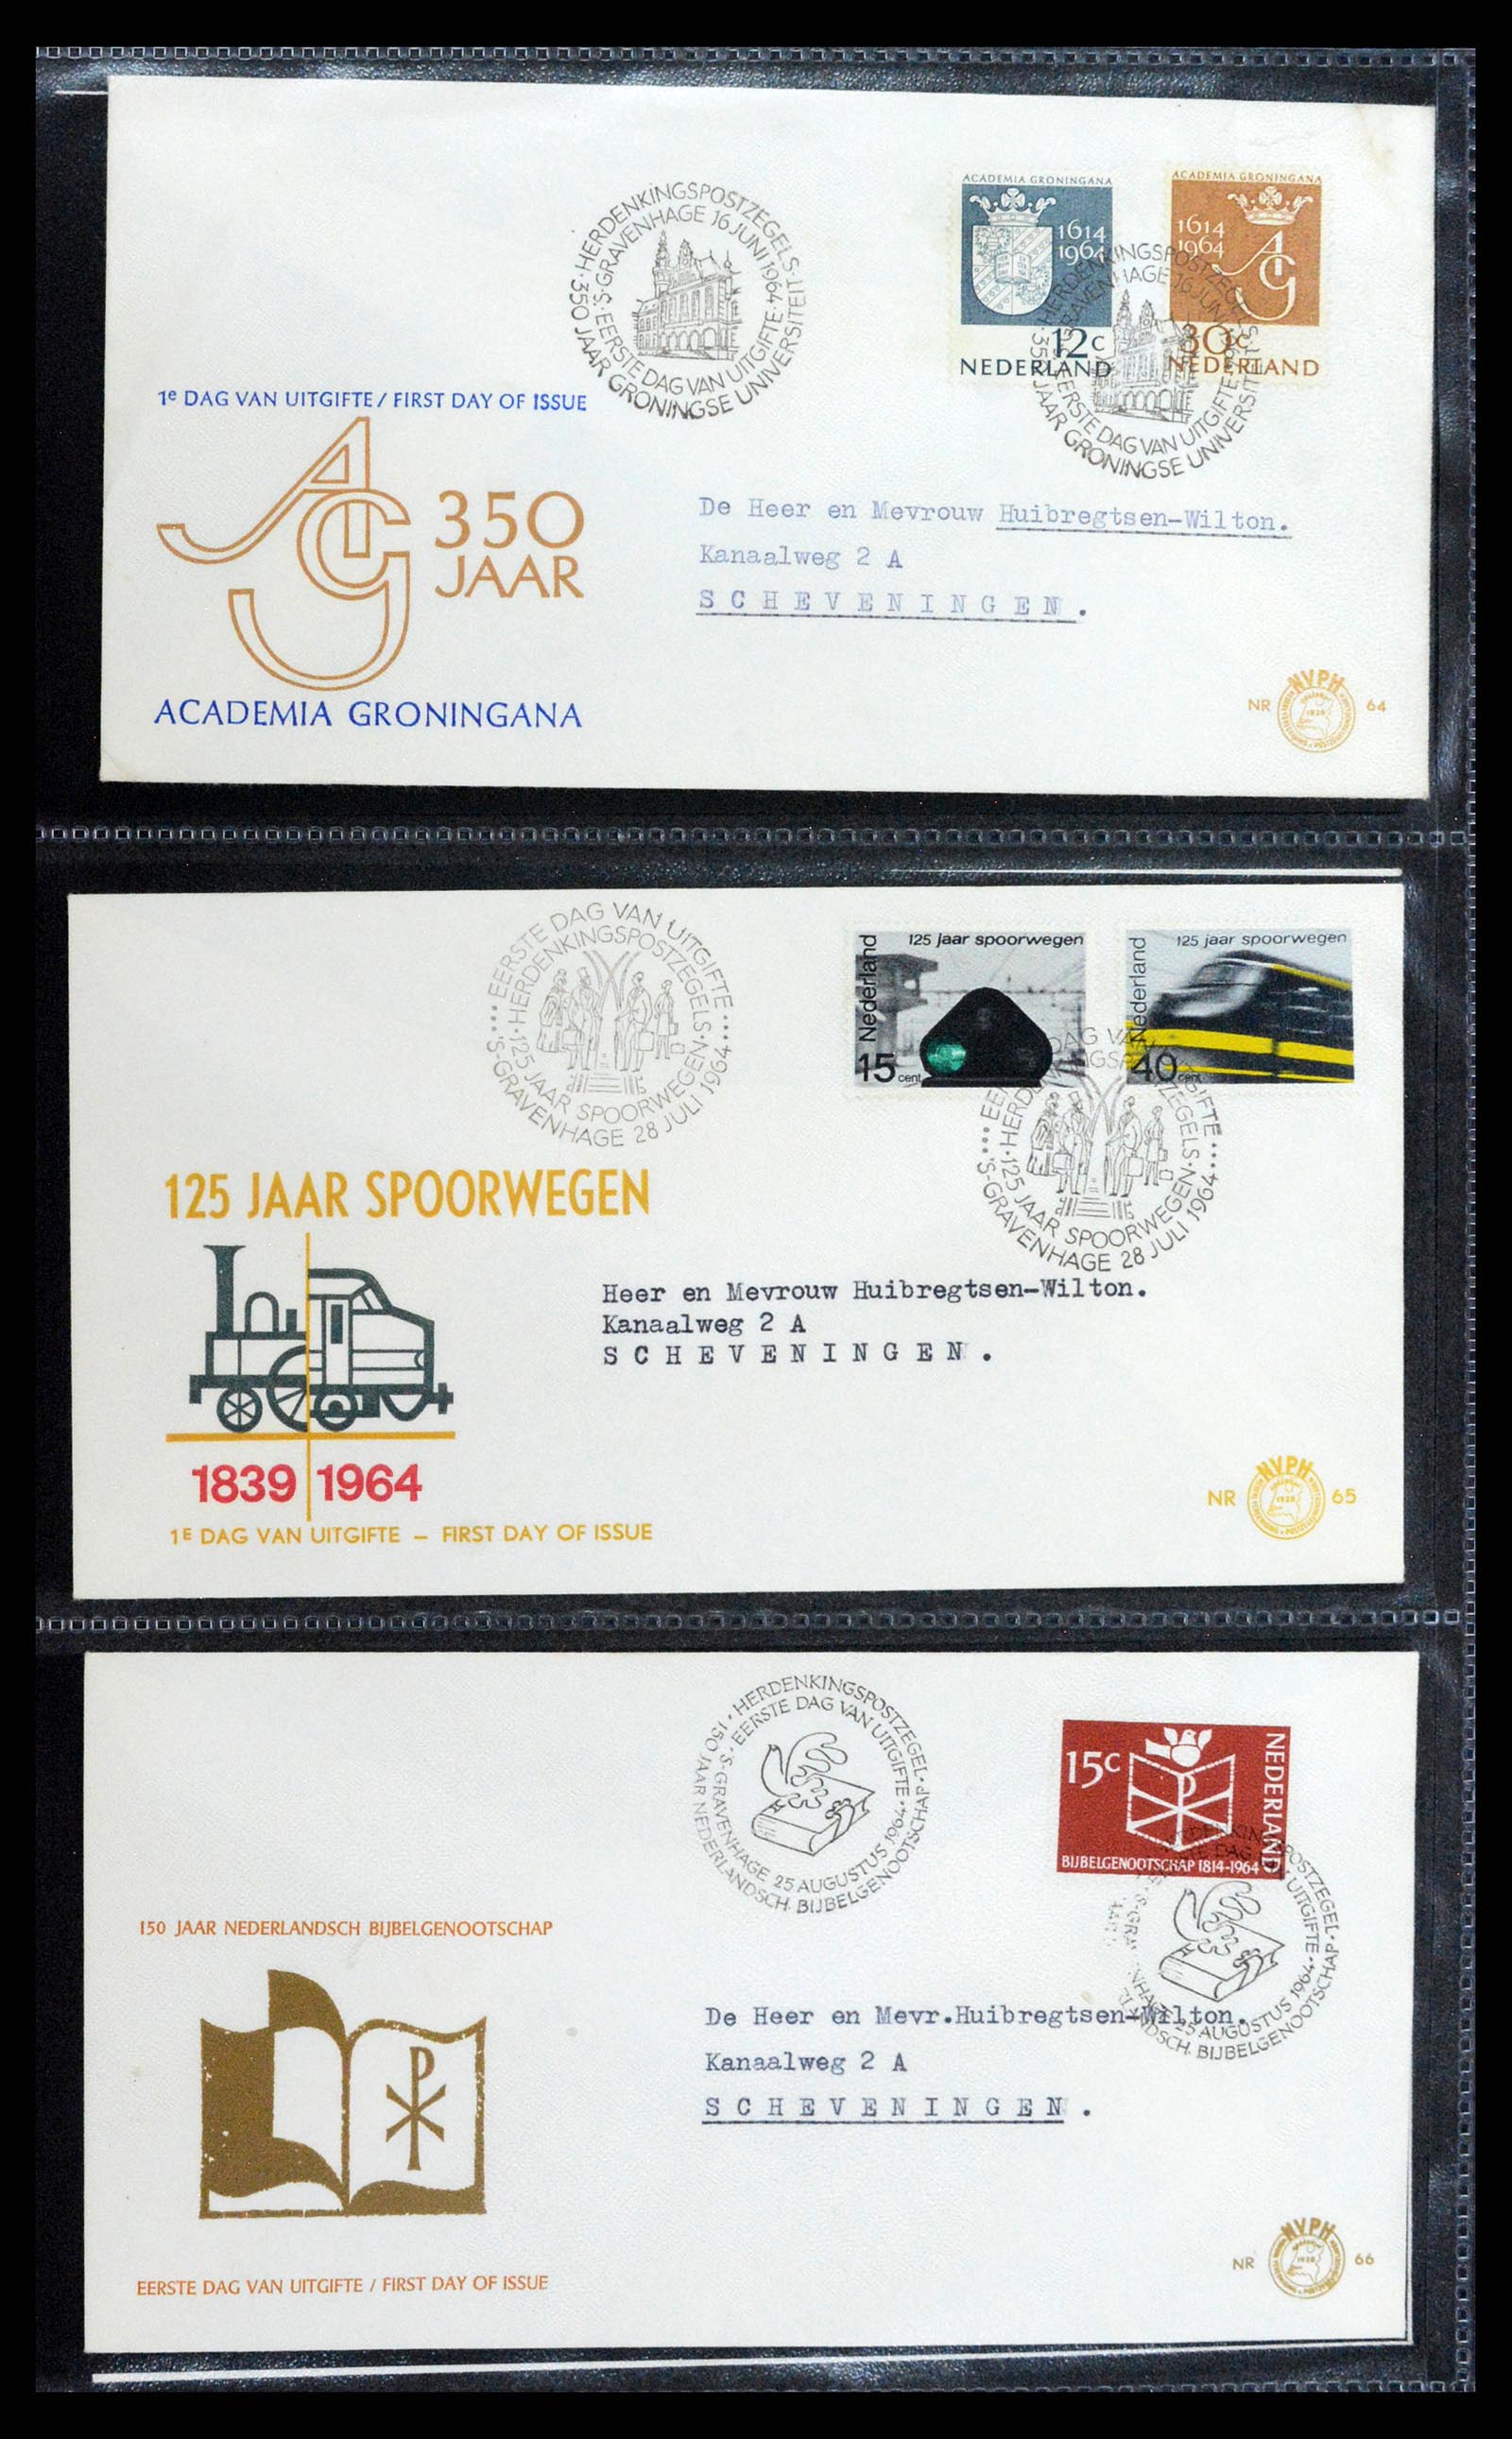 37710 024 - Stamp collection 37710 Netherlands FDC's 1949-1976.